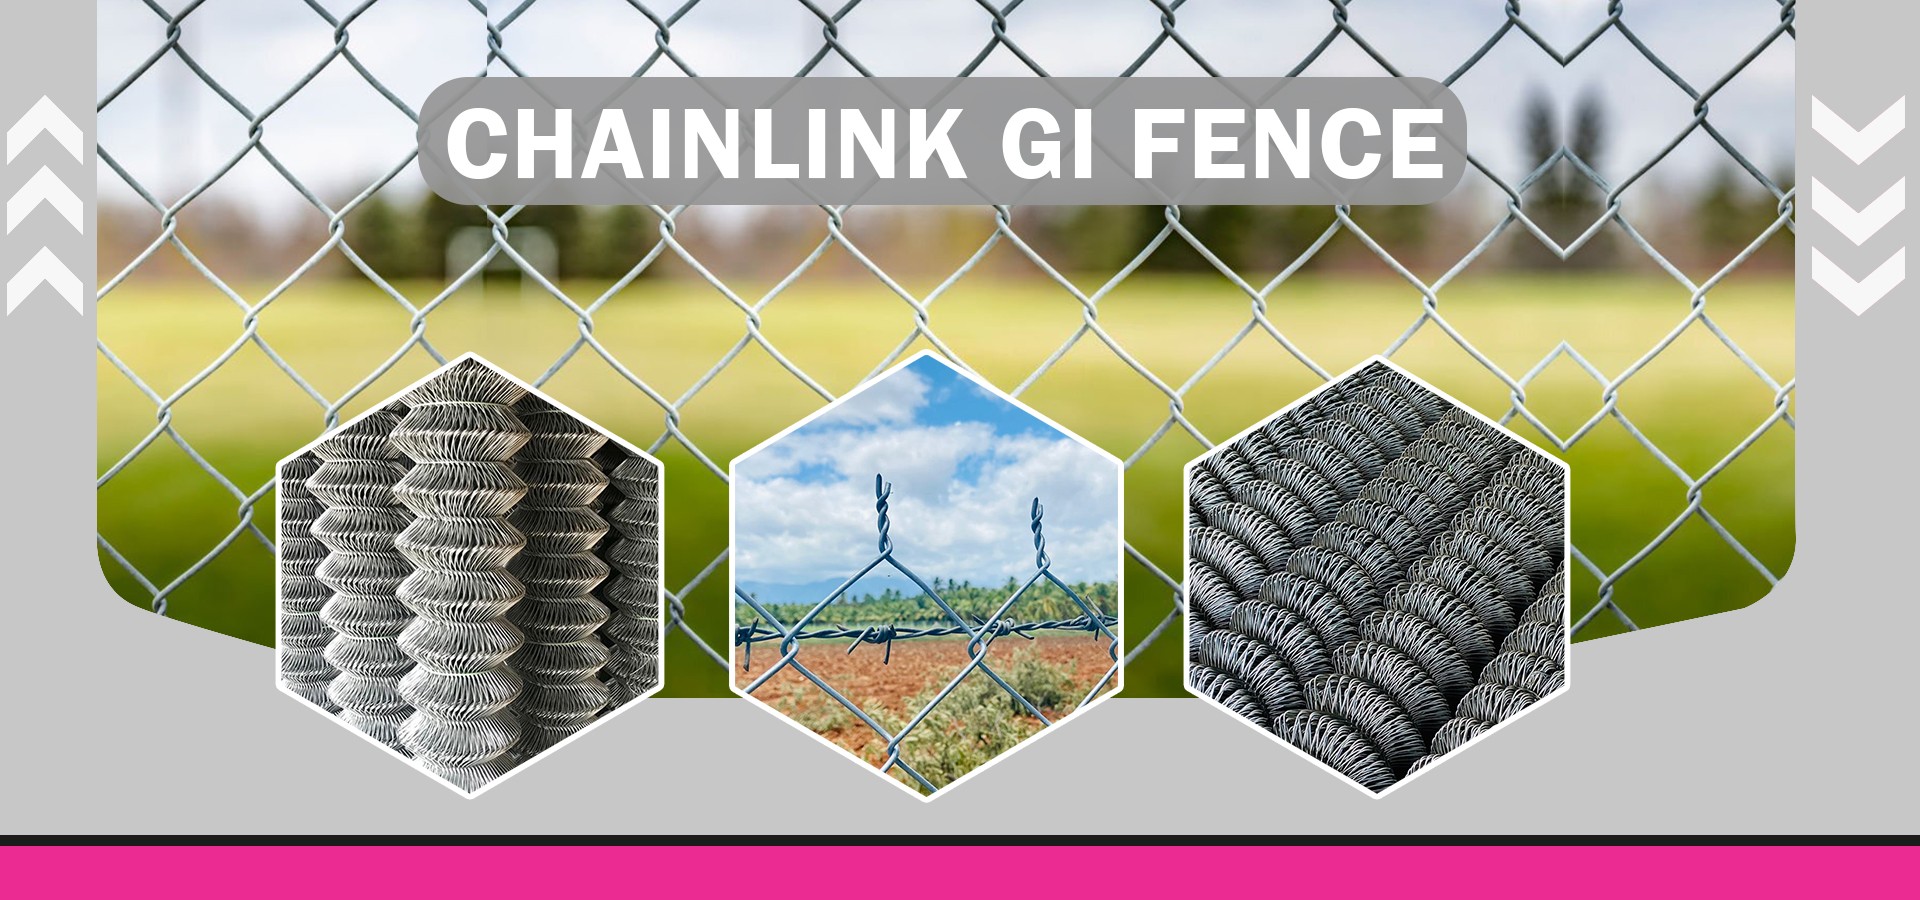 Free download  India Fence Chain-link fencing Manufacturing Wire